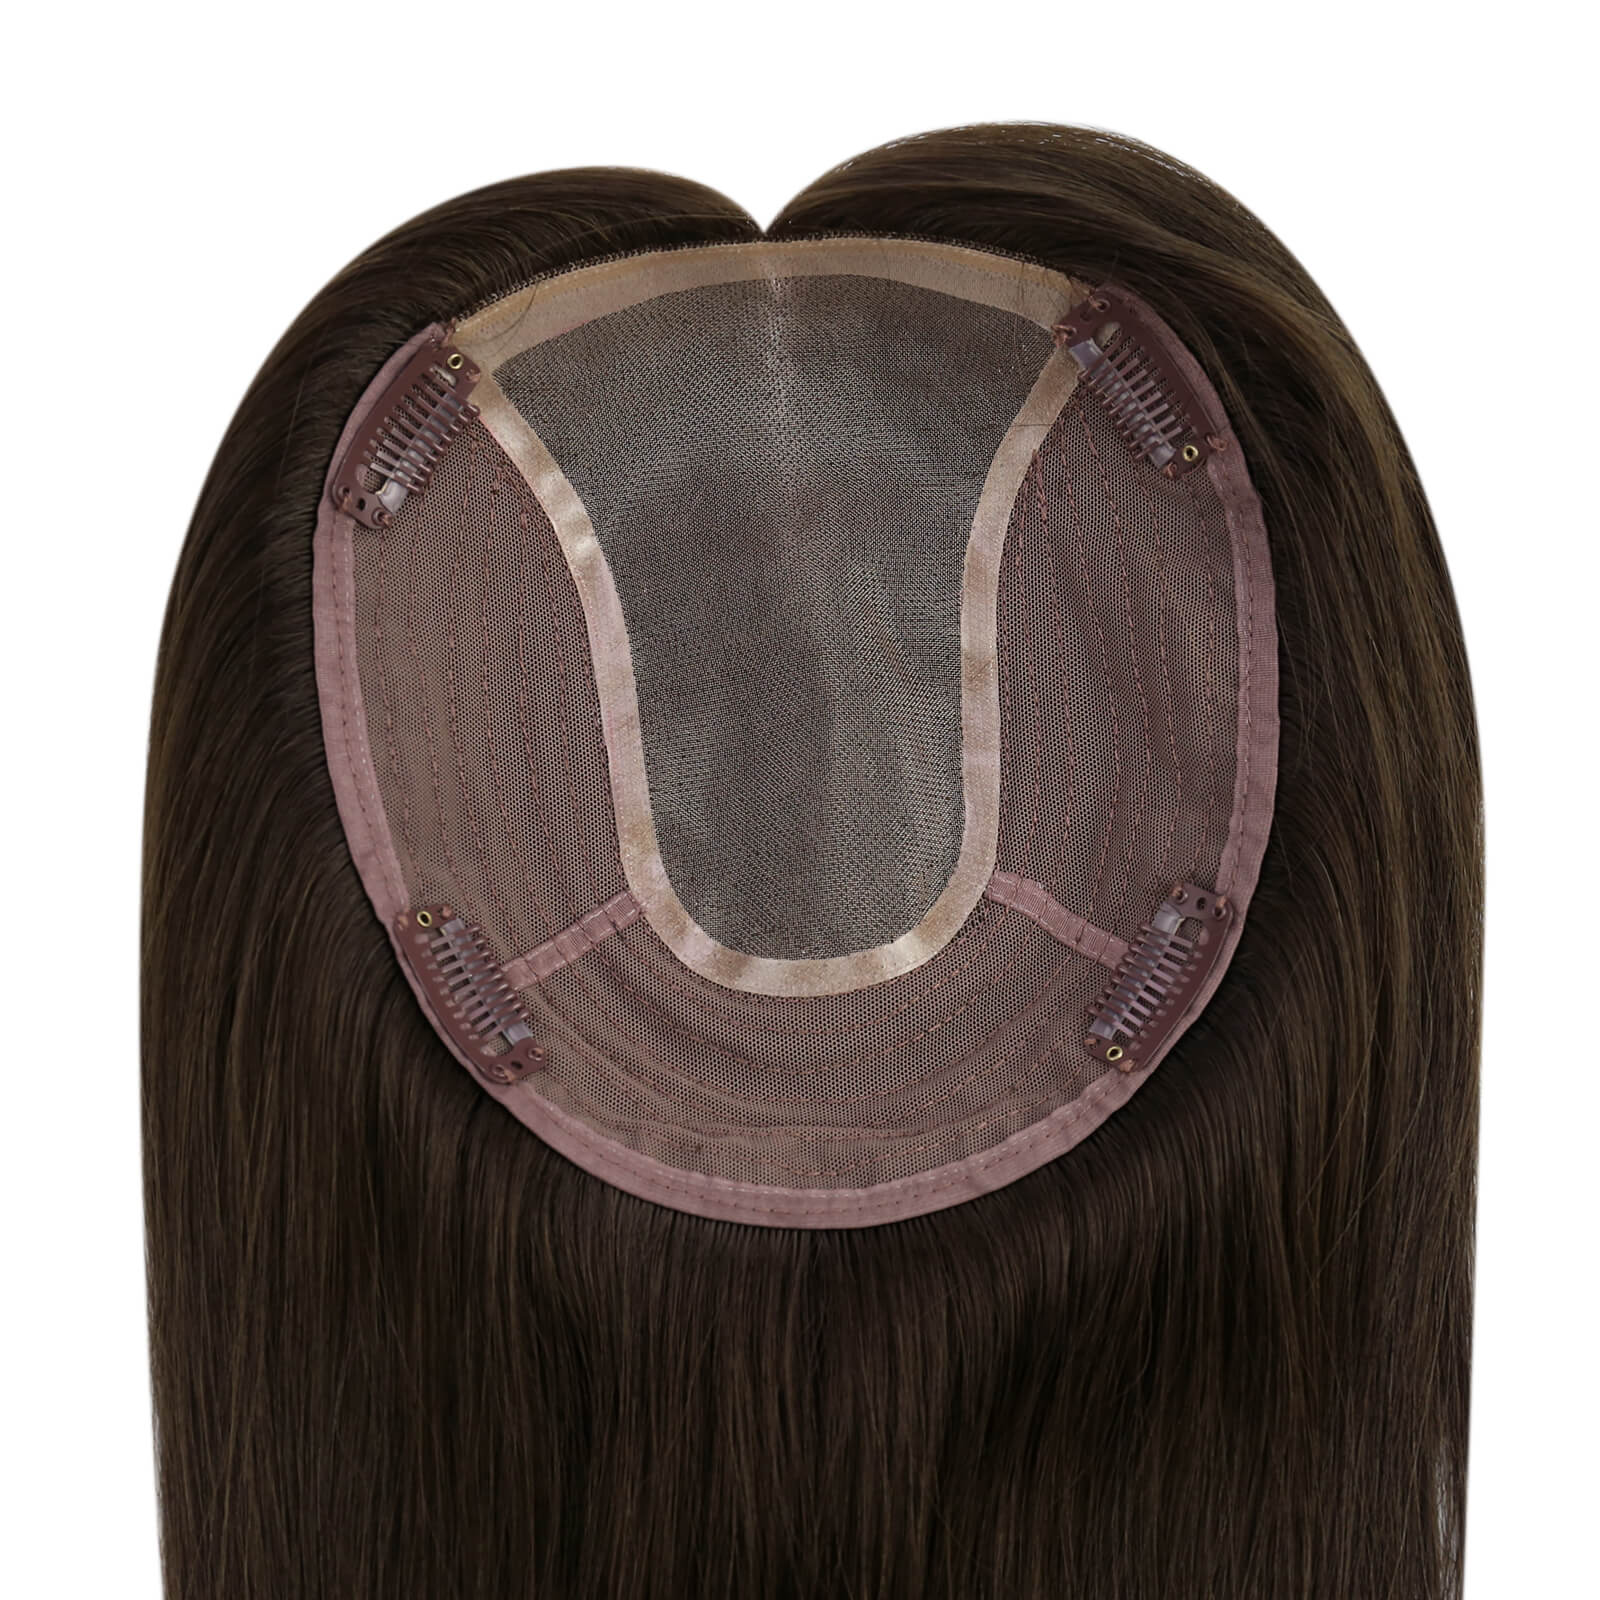 Mono Topper,human hair topper,high-quality virgin hair extensions,hair topper women,hair topper,wig,hair topper silk base,hair topper human hair,dark brown hair topper,brown hair topper,natural brown hair topper,dark brown hair topper,distribute seams at will,invisible topper,large base topper,large base 6*7 inch